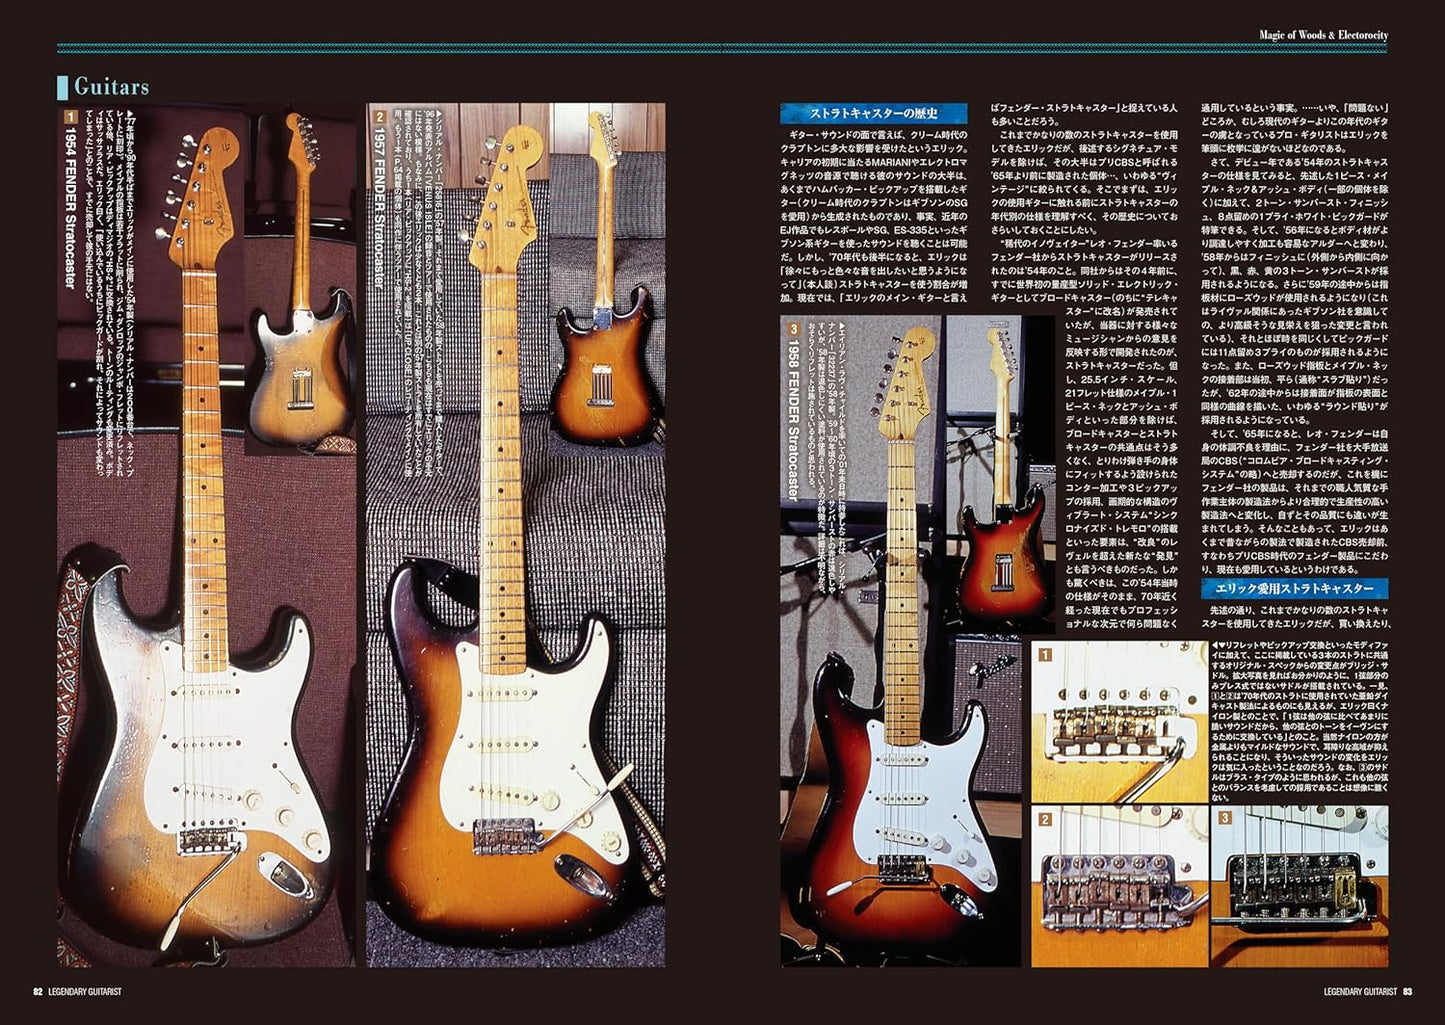 Legendary Guitarist Eric Johnson YOUNG GUITAR SPECIAL ISSUE